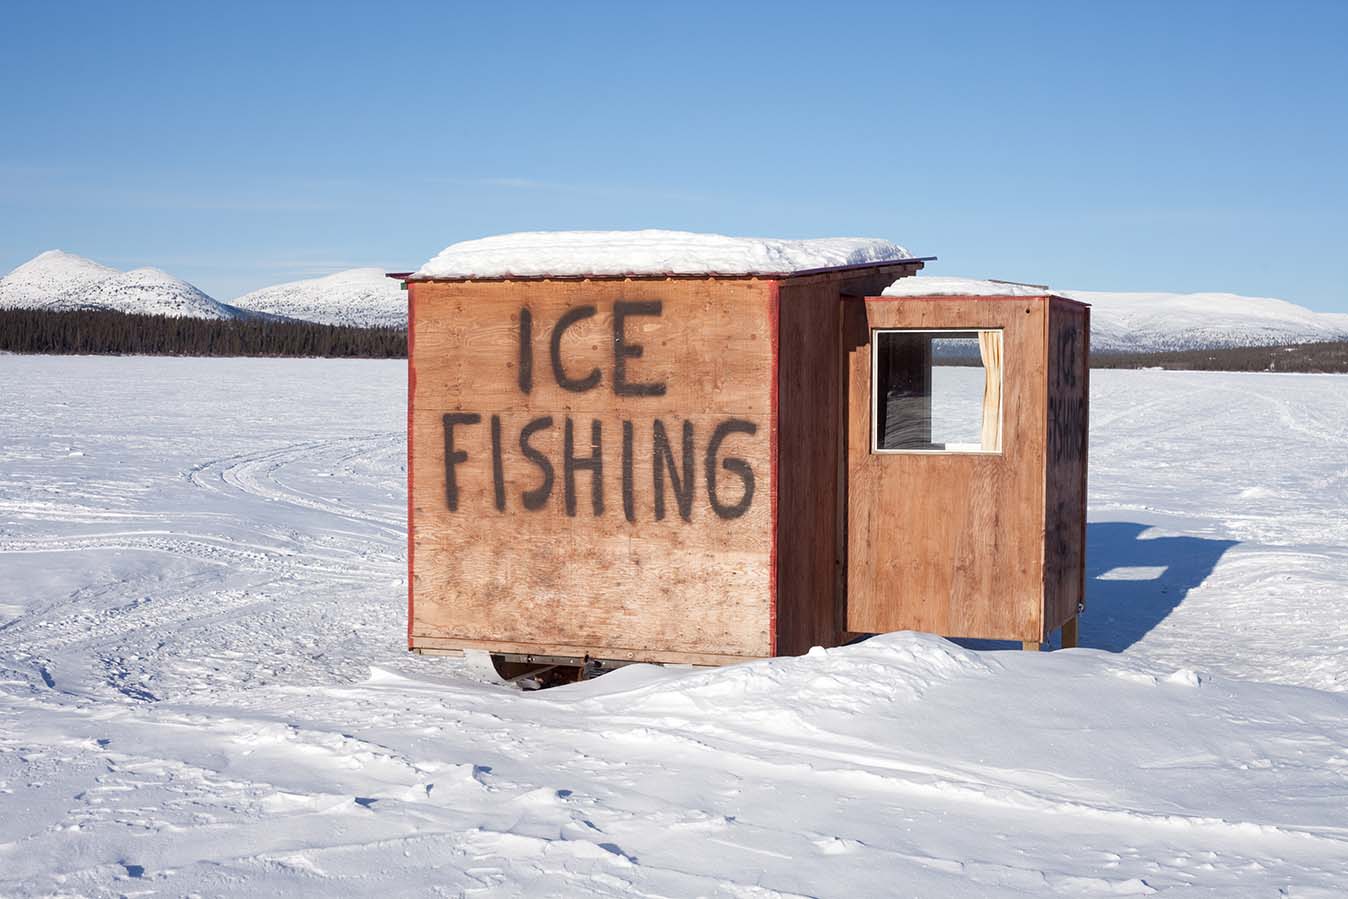 A wheeled shack on the ice with "Ice Fishing" written on the side.